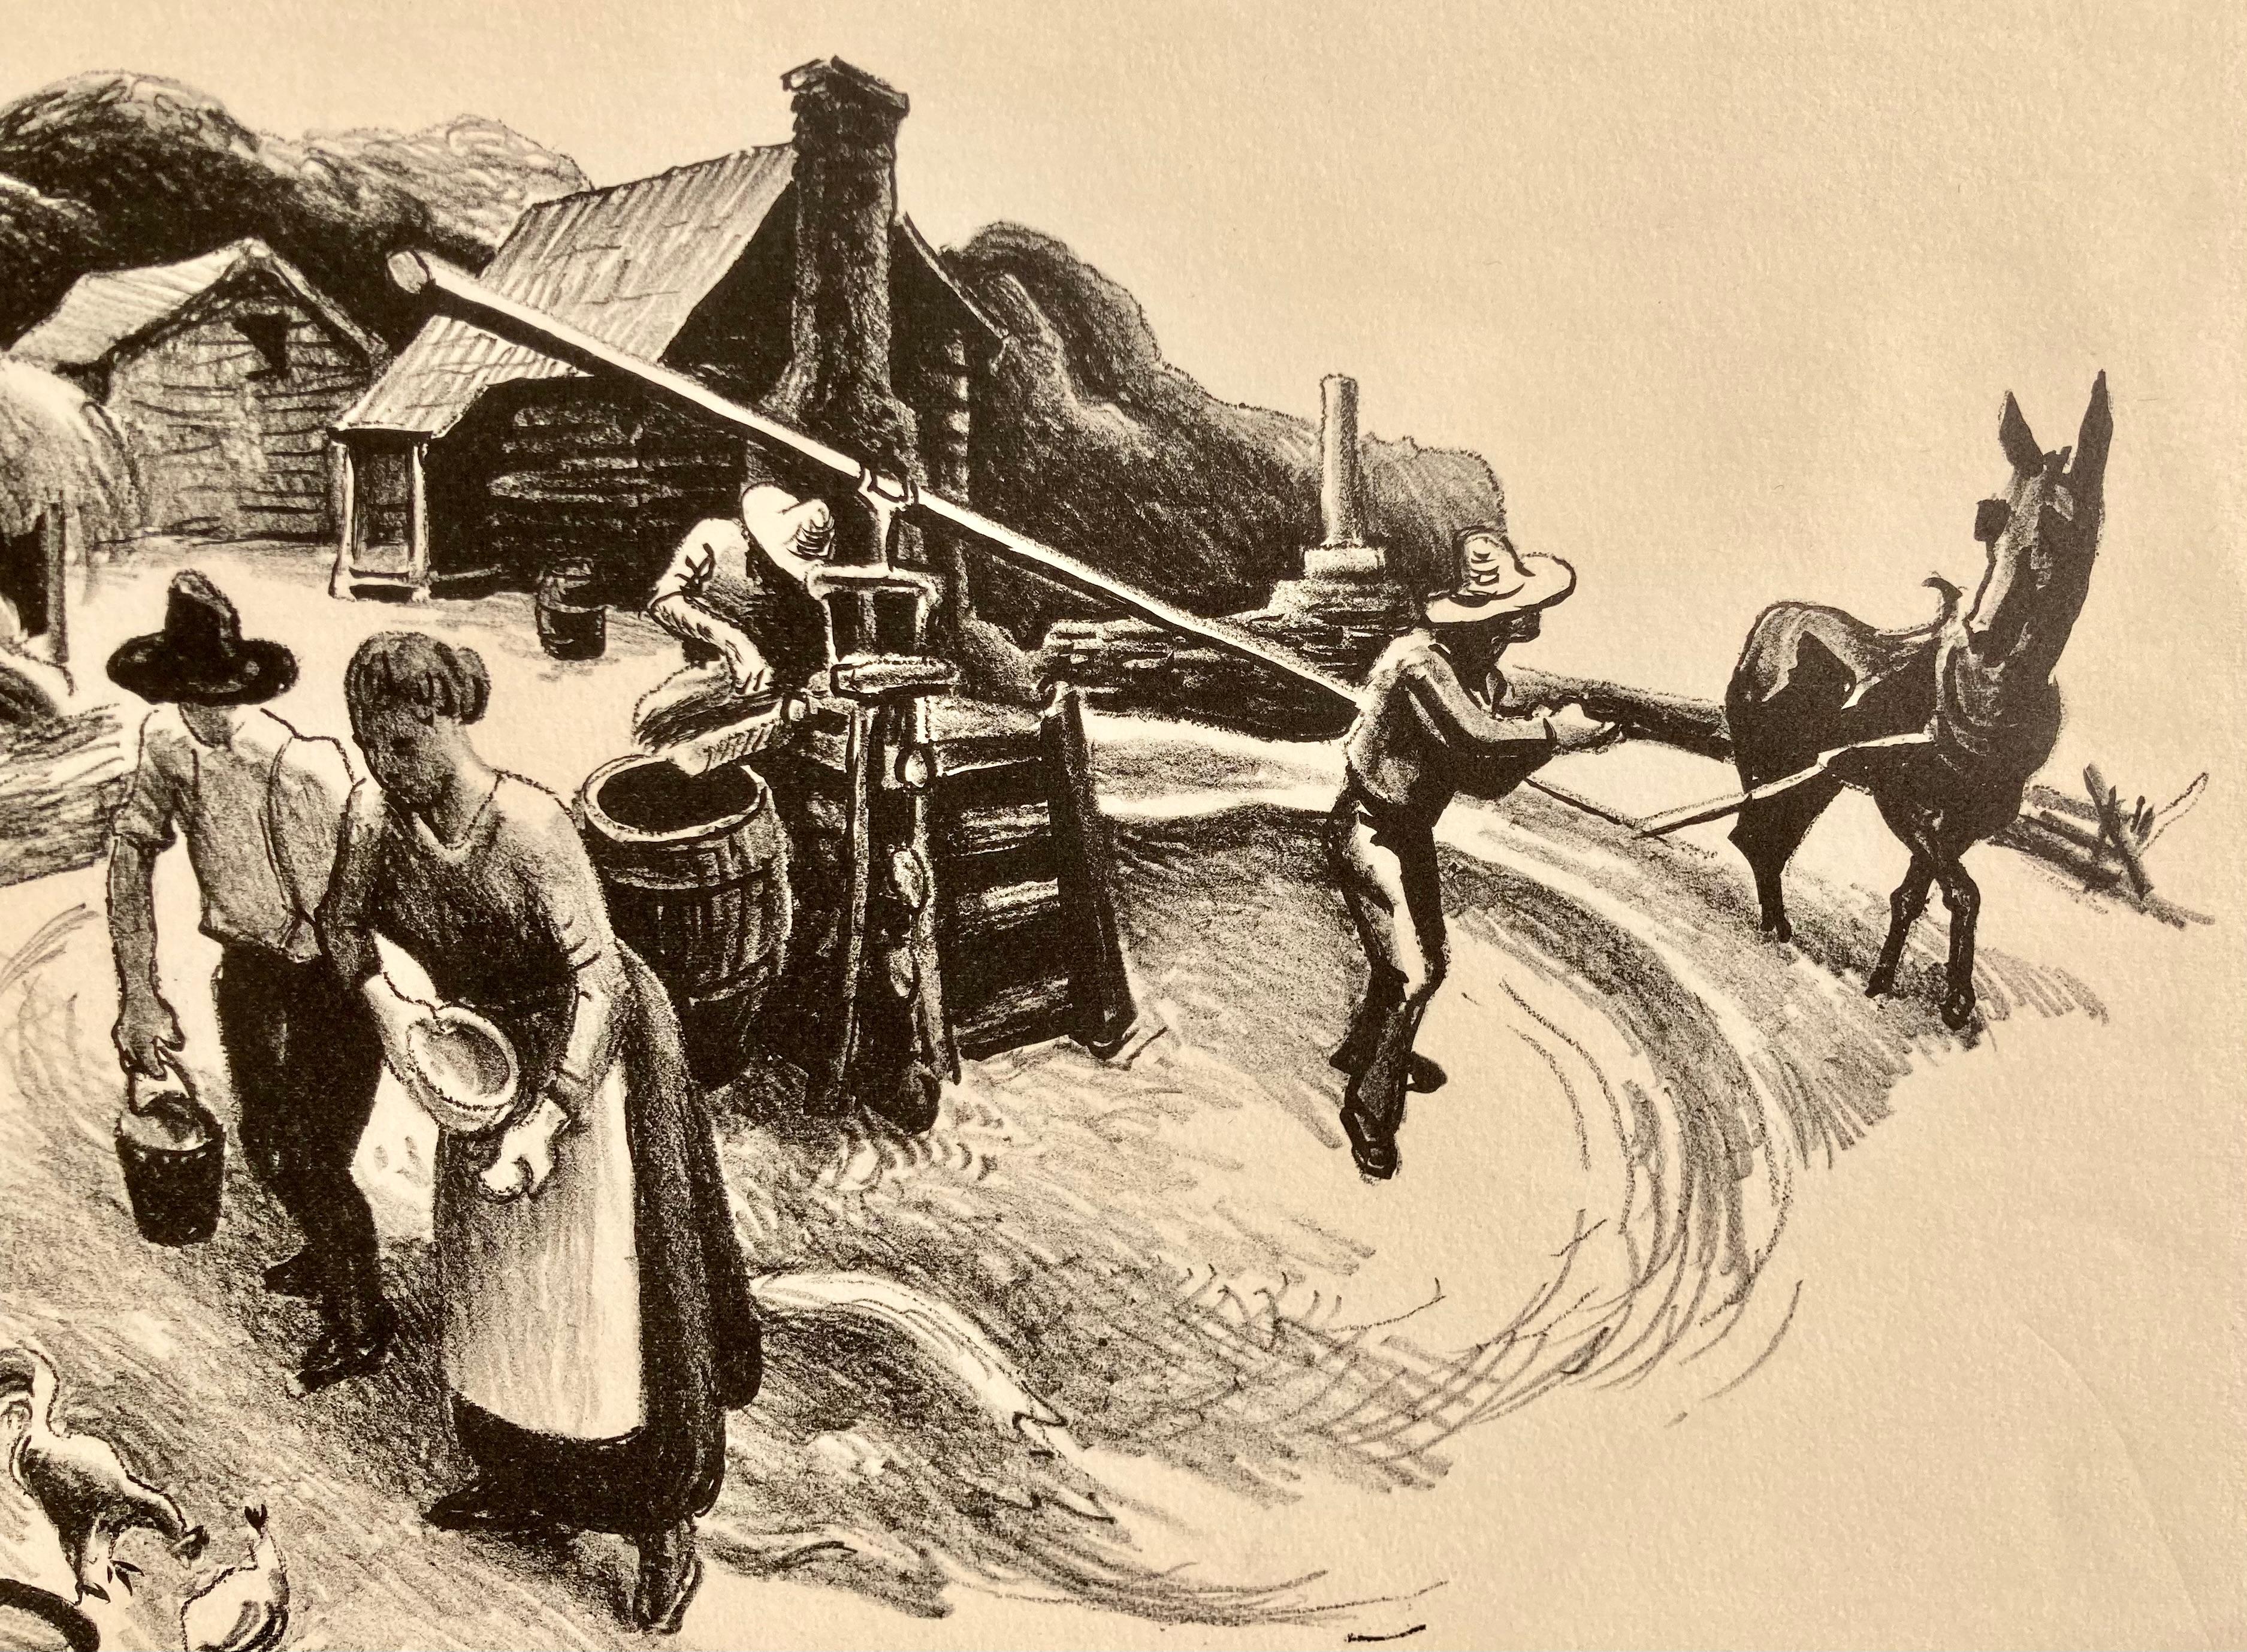 THOMAS HART BENTON (1889-1975)

MISSOURI FARMYARD, 1936 (Fath 10) AKA KANSAS FARMYARD
Lithograph as published by Associated American Artists. Edition 250. Signed in pencil and in the stone. Image 10 ¼ x 16 inches, sheet 14 3/8 x 18 5/8 inches. In